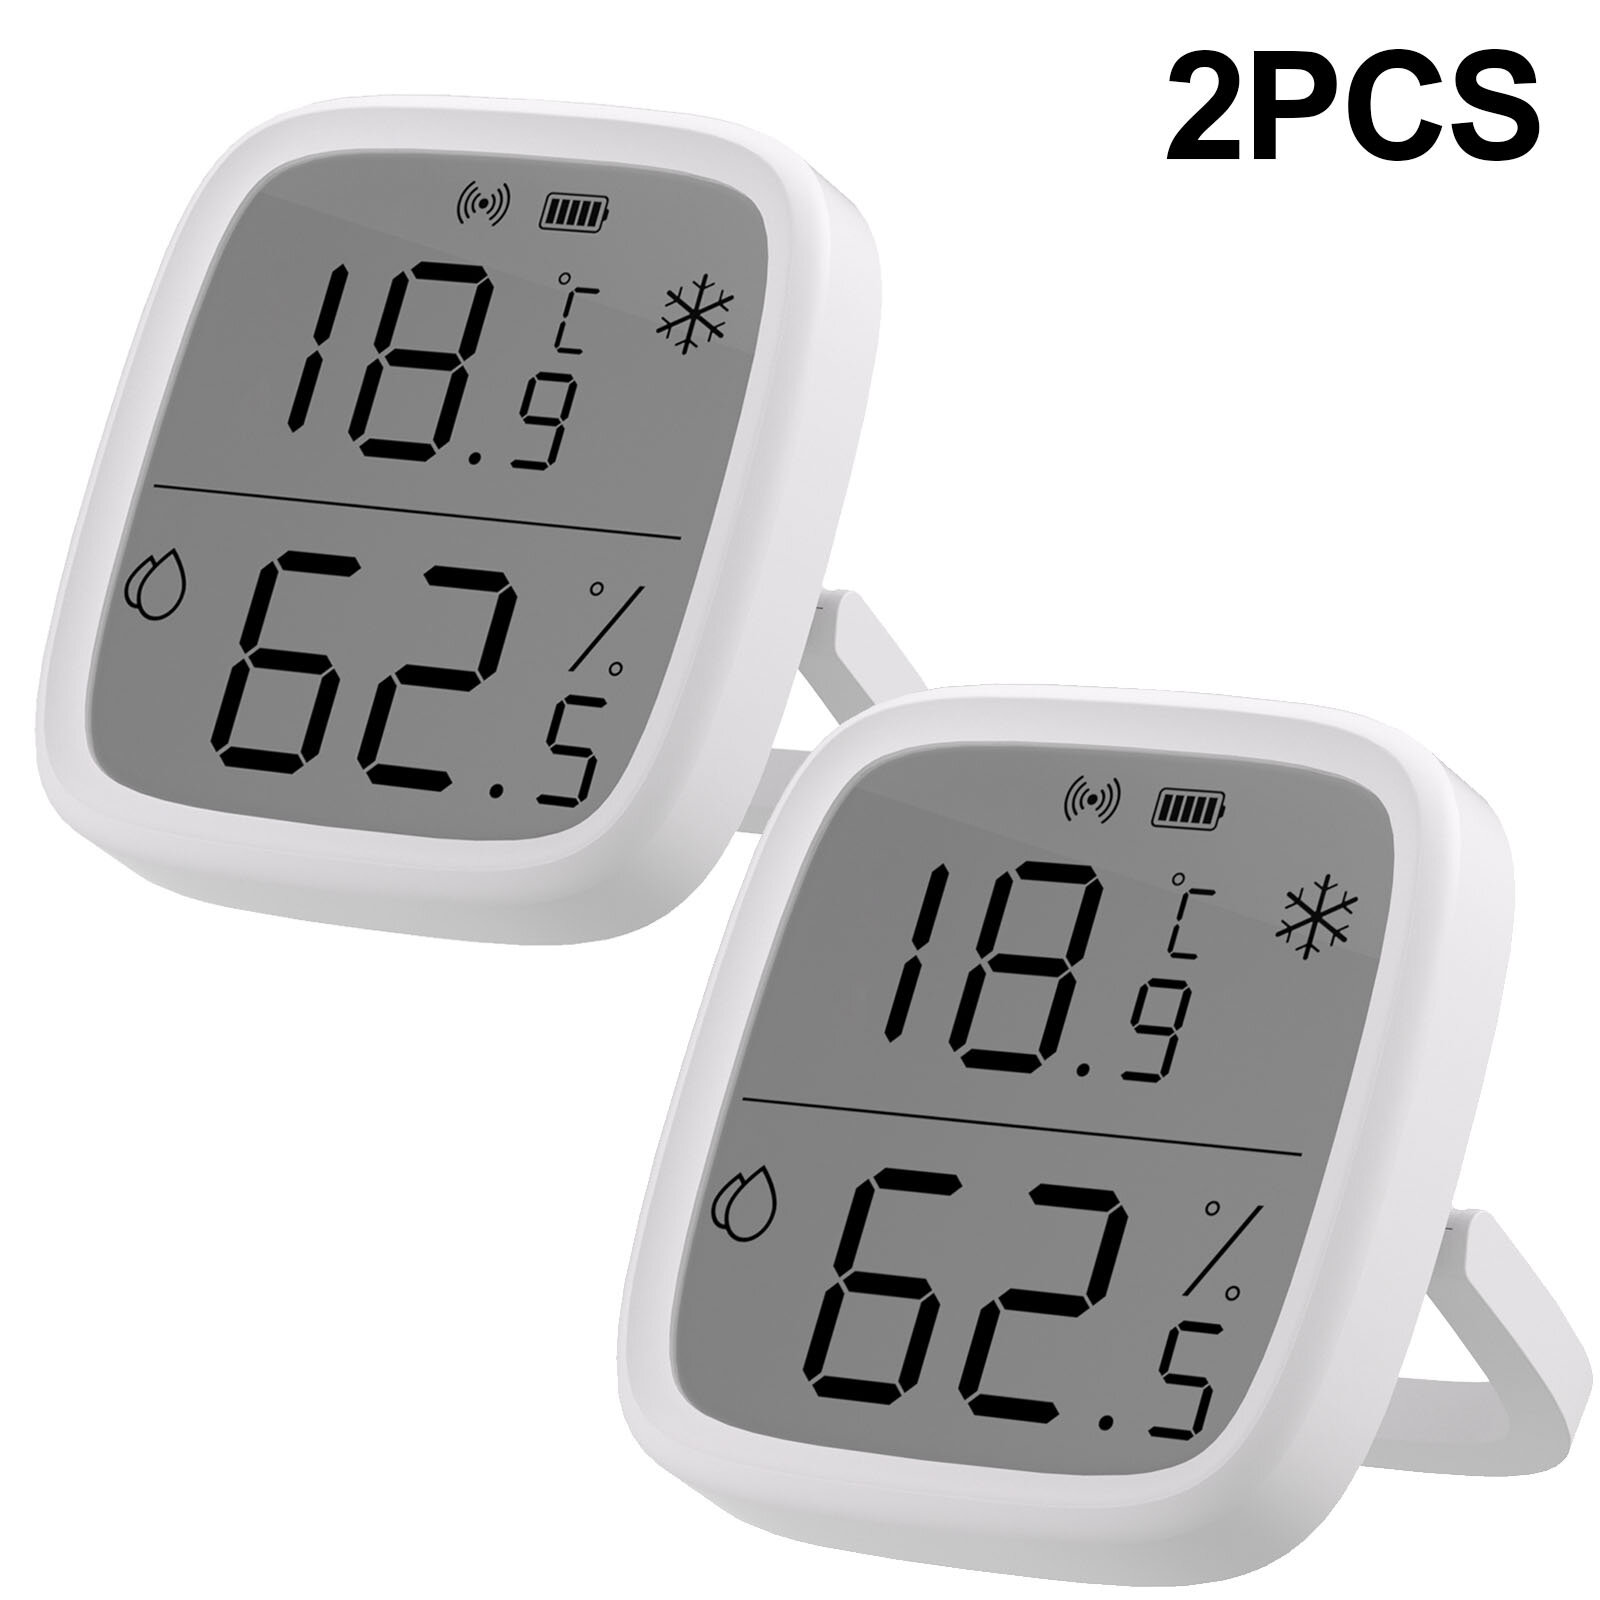 best price,sonoff,snzb,02d,2pcs,lcd,smart,temperature,humidity,sensor,coupon,price,discount